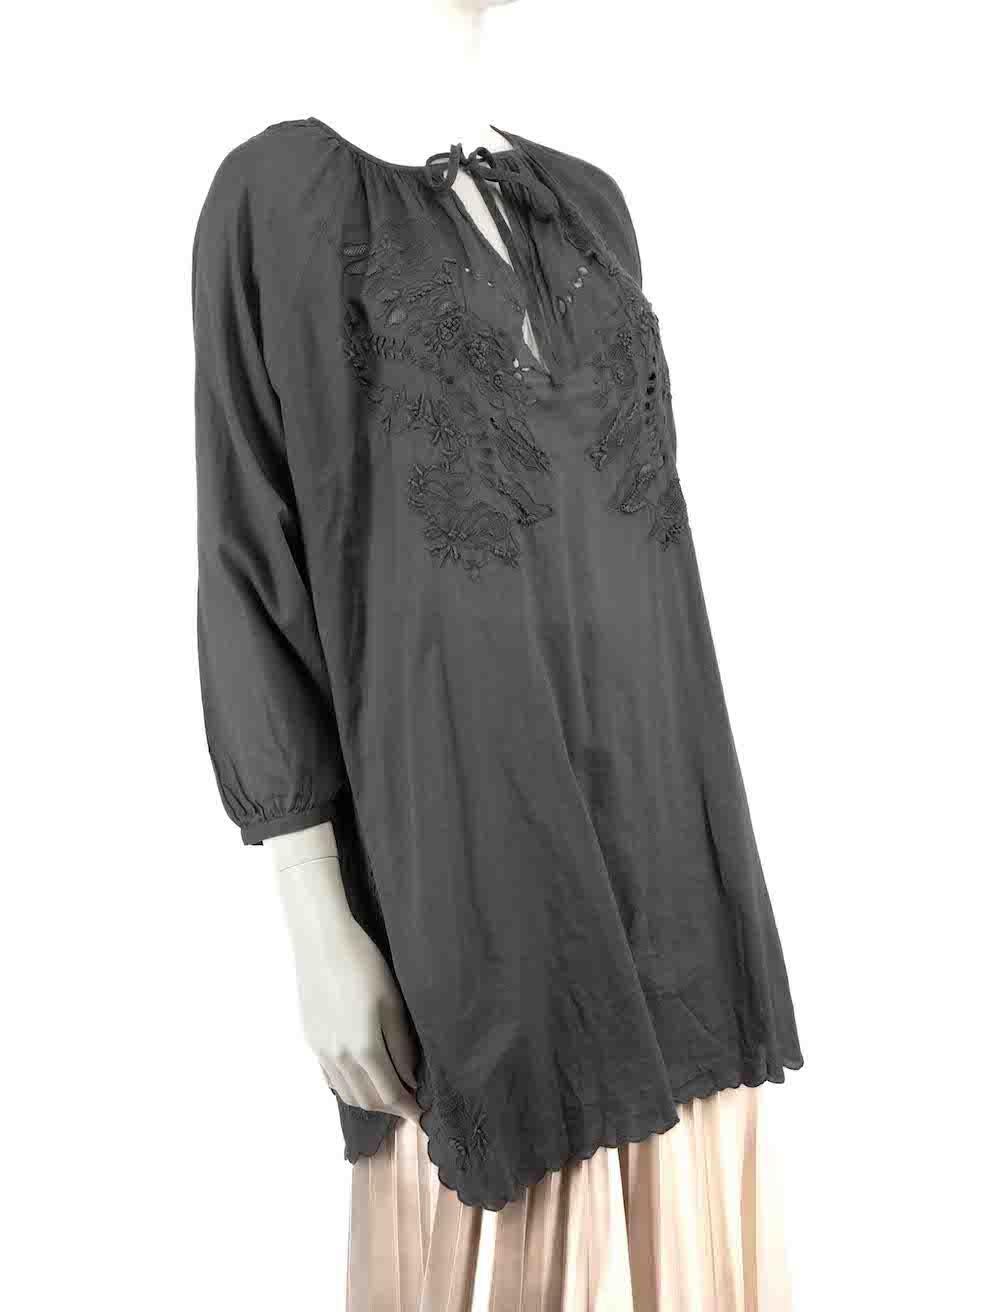 CONDITION is Never worn. No visible wear to top is evident on this new Zadig & Voltaire designer resale item.
 
 Details
 Grey
 Cotton
 Tunic top
 Long sleeves
 Round neck
 Floral lace trim
 Front neck tie
 
 
 Made in India
 
 Composition
 100%